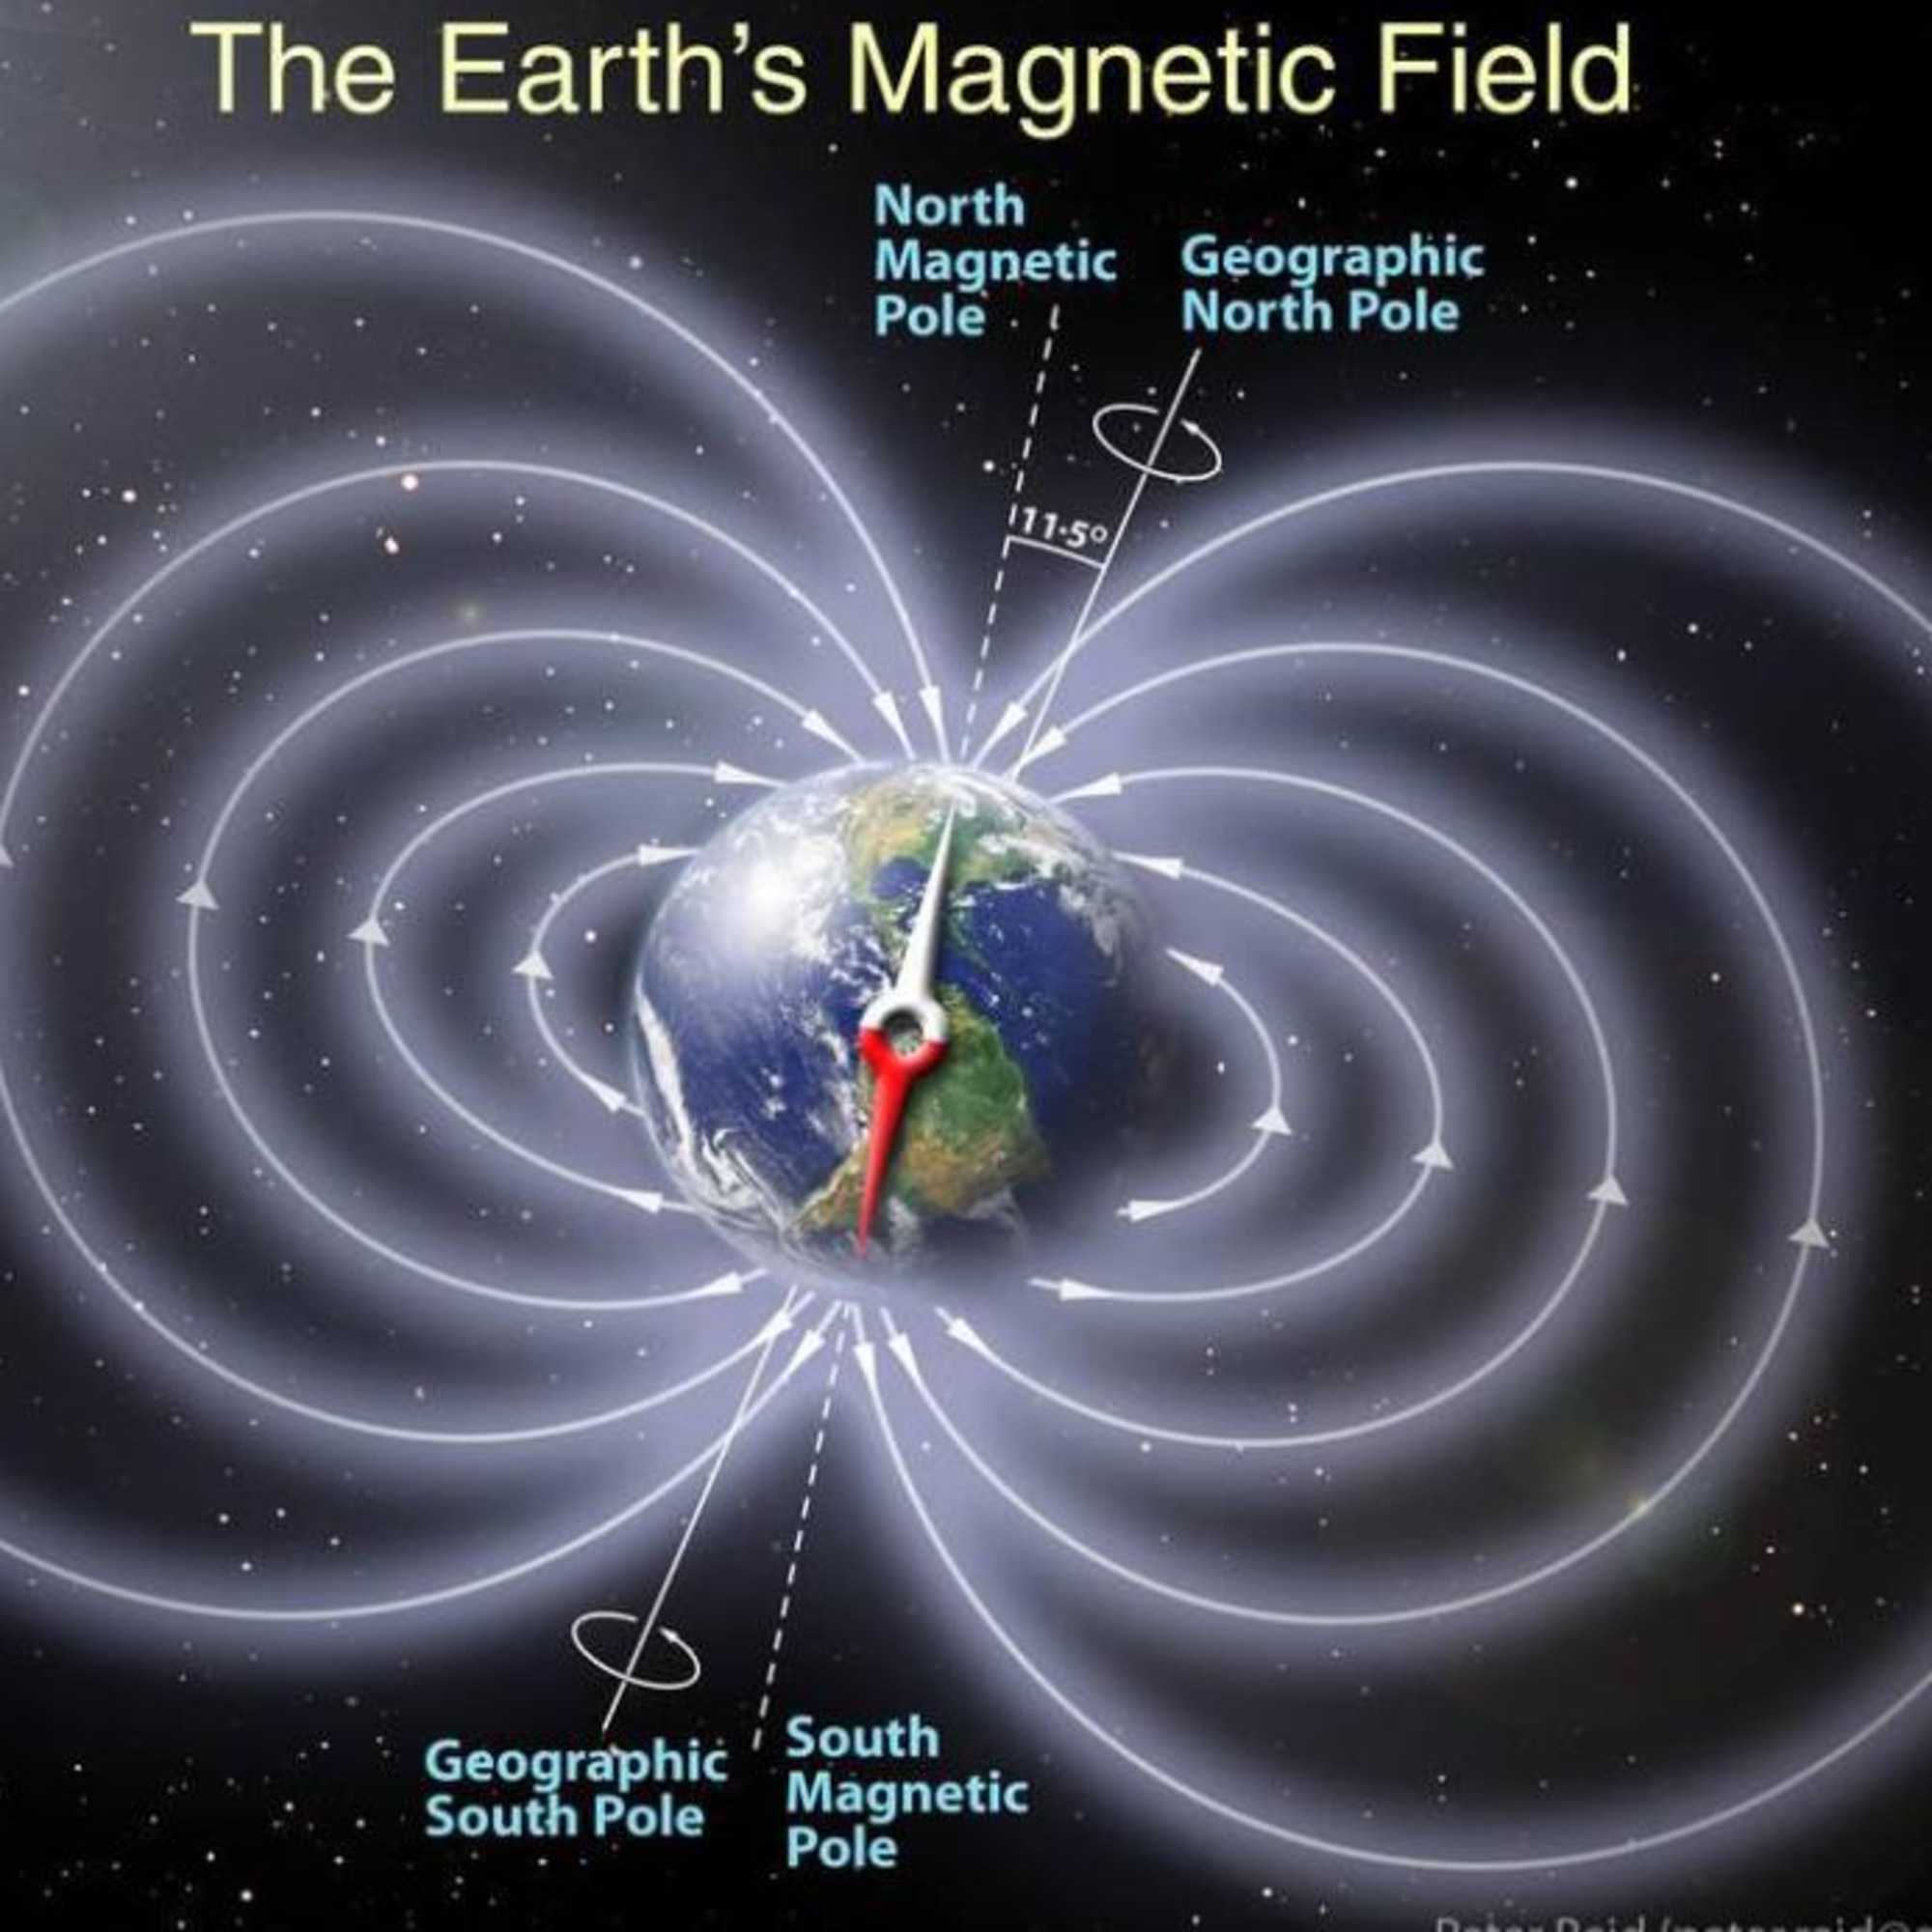 Earth’s magnetic poles are not located in the same spot as its geographical poles.